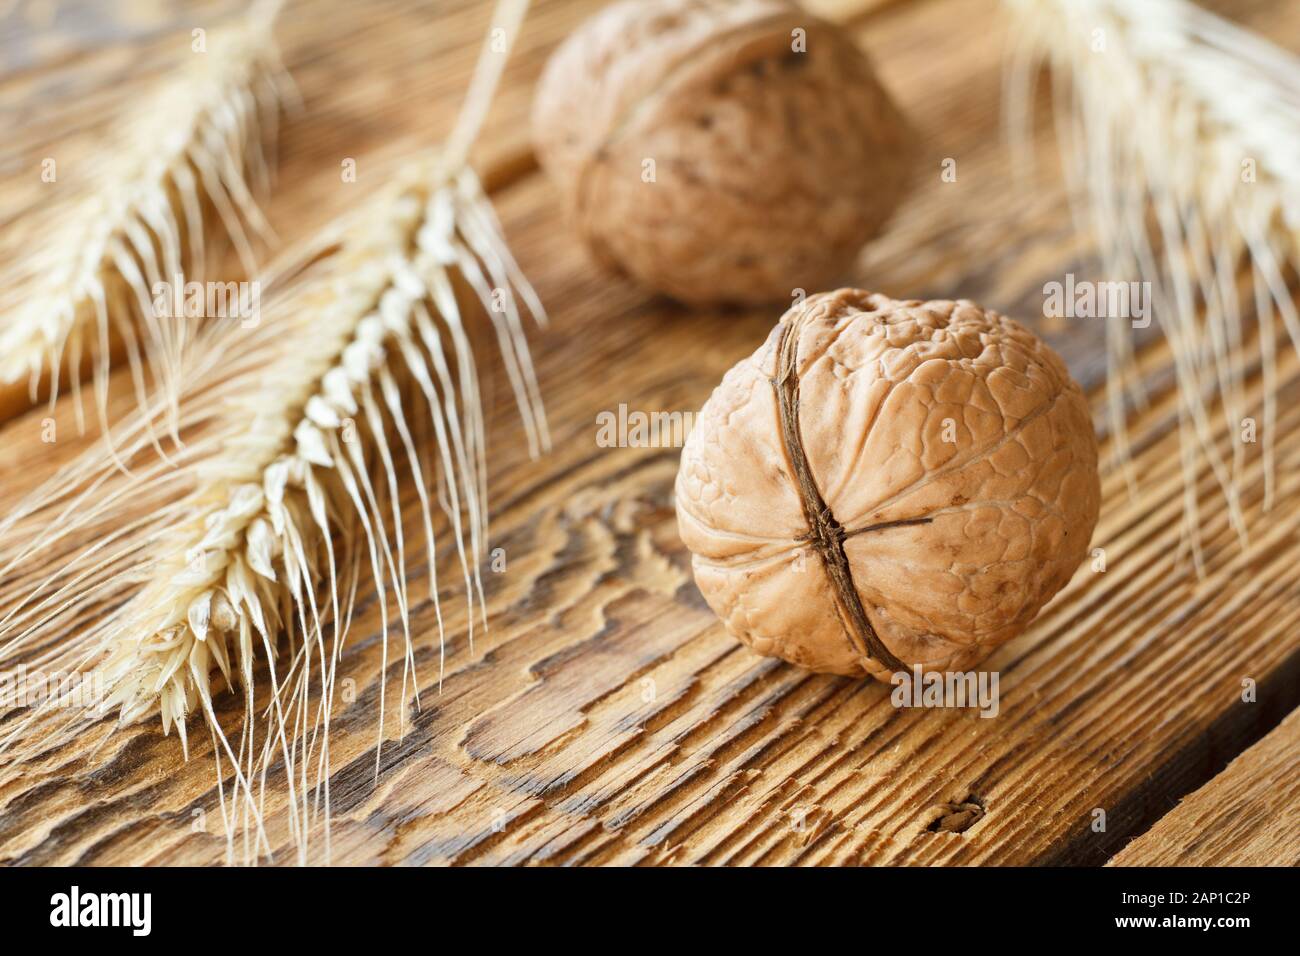 Close-up walnuts and wheat ear on old wooden board. Shallow depth of field. Focus on a front walnut. Stock Photo